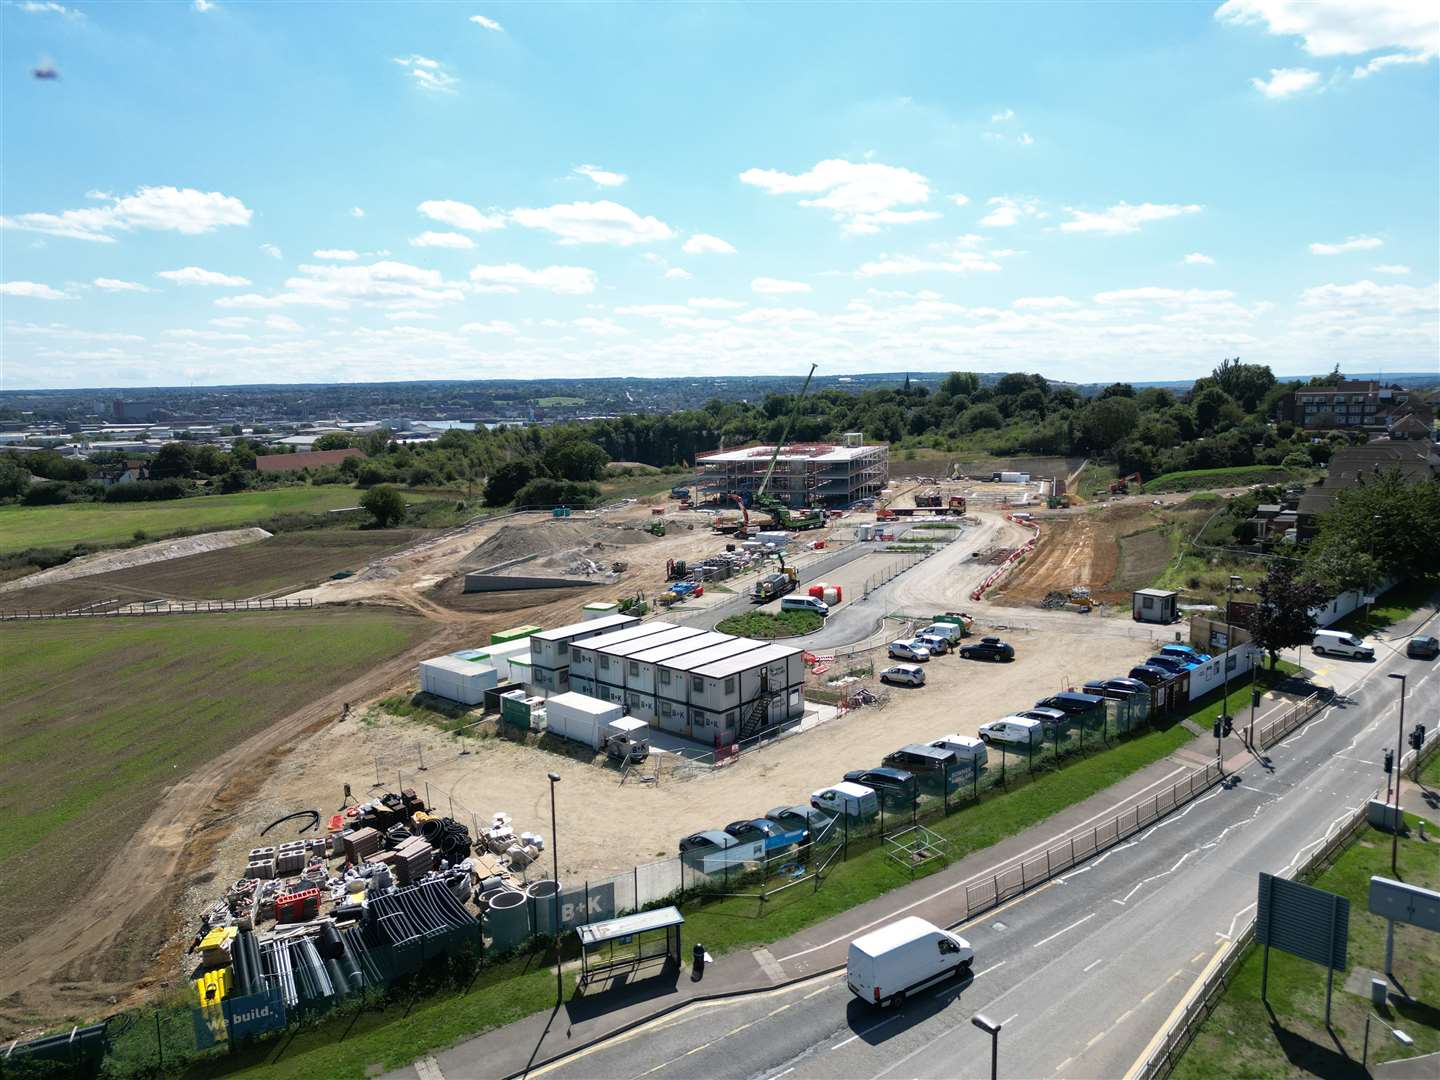 The new secondary school being built just off Frindsbury Hill, Strood. Picture: Barry Goodwin